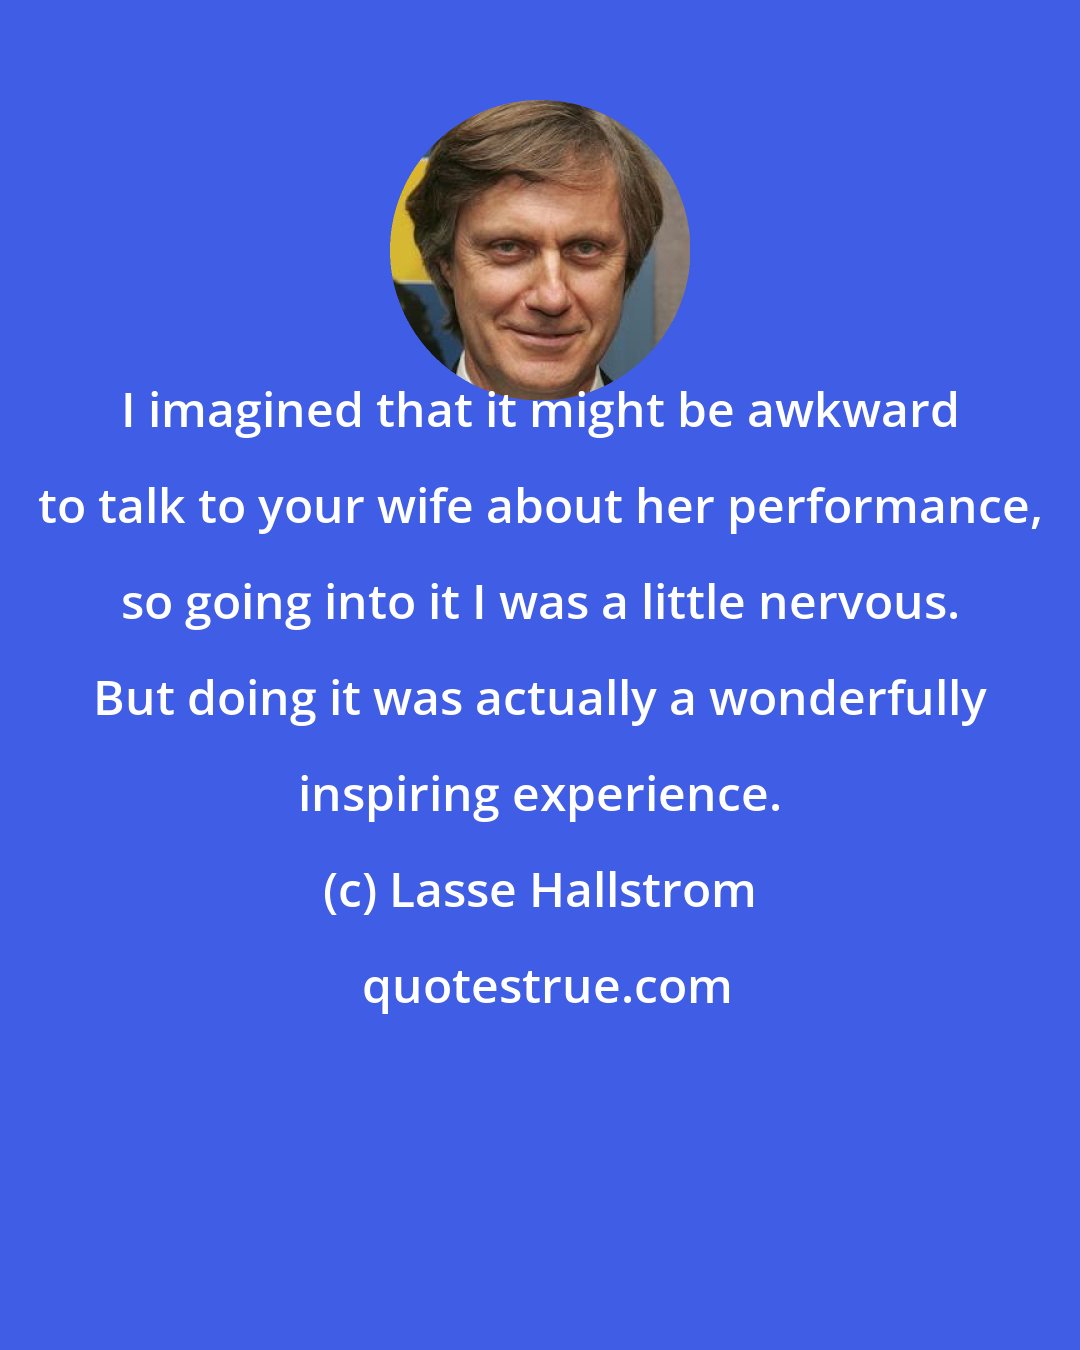 Lasse Hallstrom: I imagined that it might be awkward to talk to your wife about her performance, so going into it I was a little nervous. But doing it was actually a wonderfully inspiring experience.